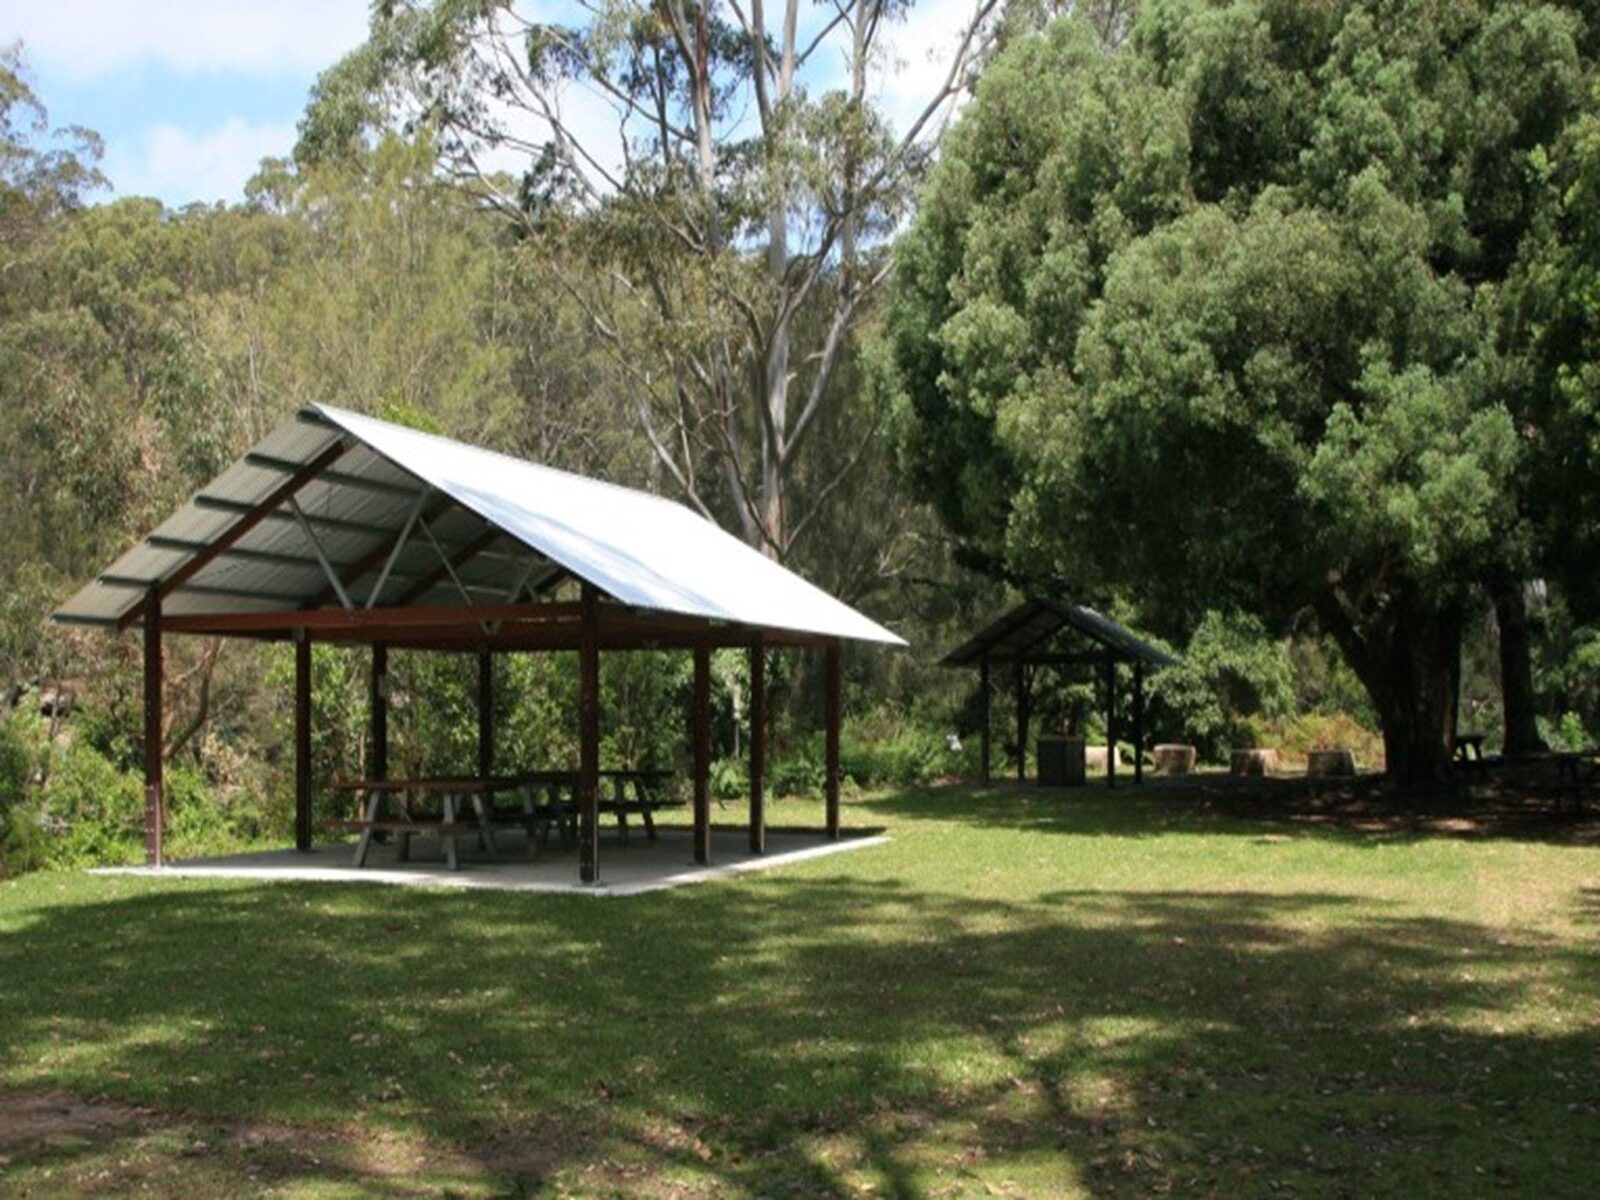 A large picnic shelter next to trees at Casuarina Point picnic area in Lane Cove National Park.